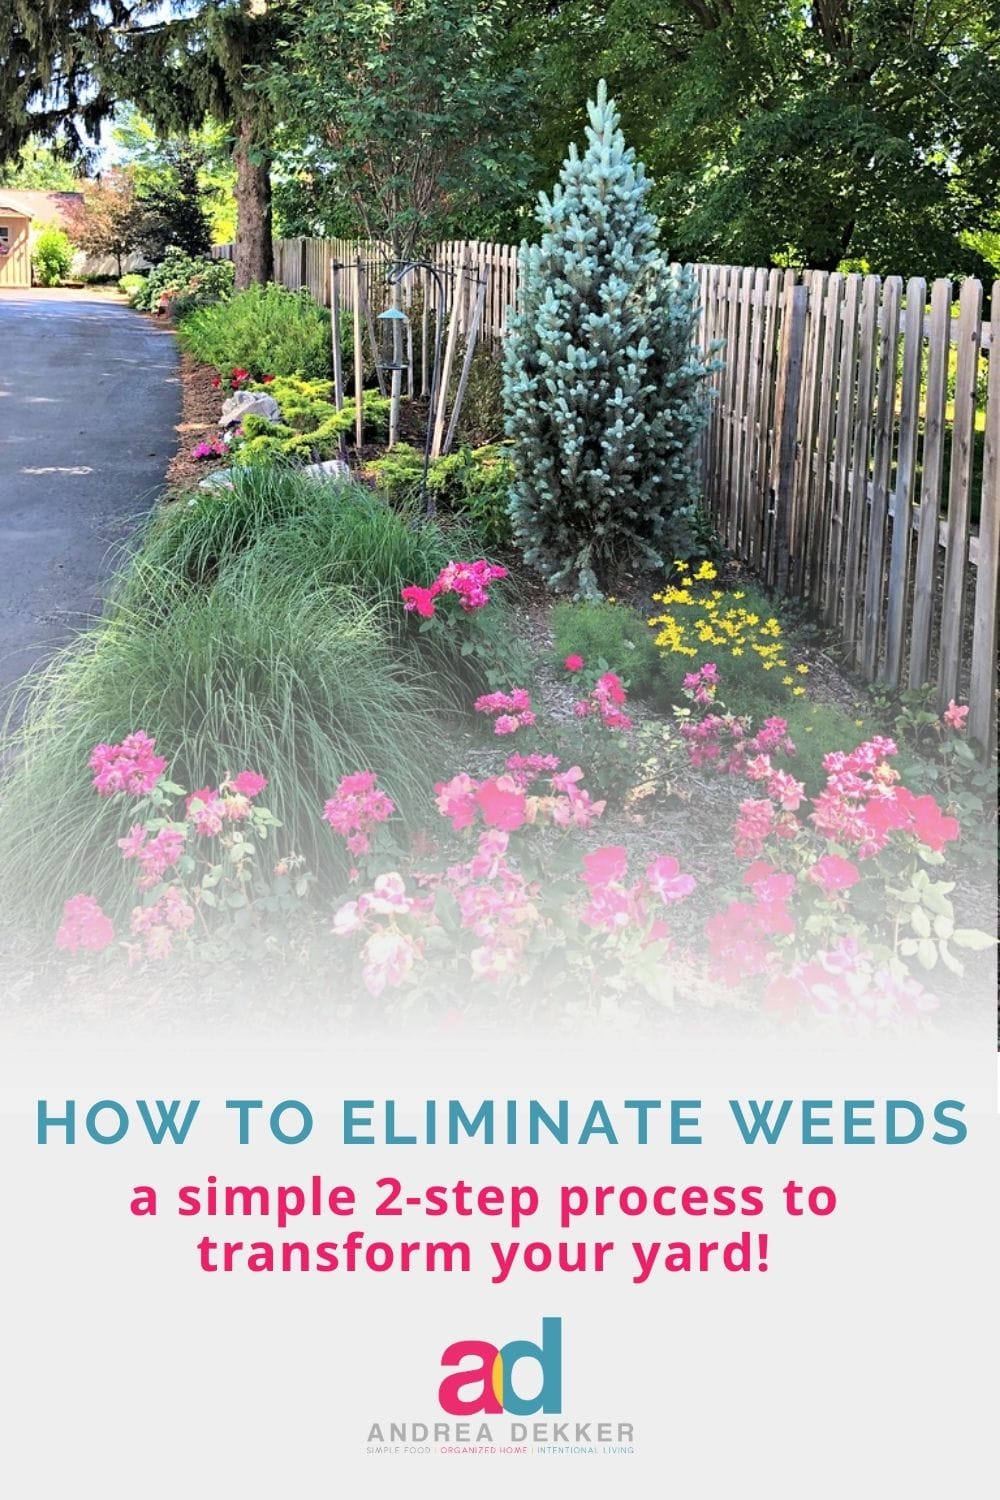 Create the landscape of your dreams without spending tons of time pulling weeds. Get rid of weeds for good with a simple 2-step process. via @andreadekker